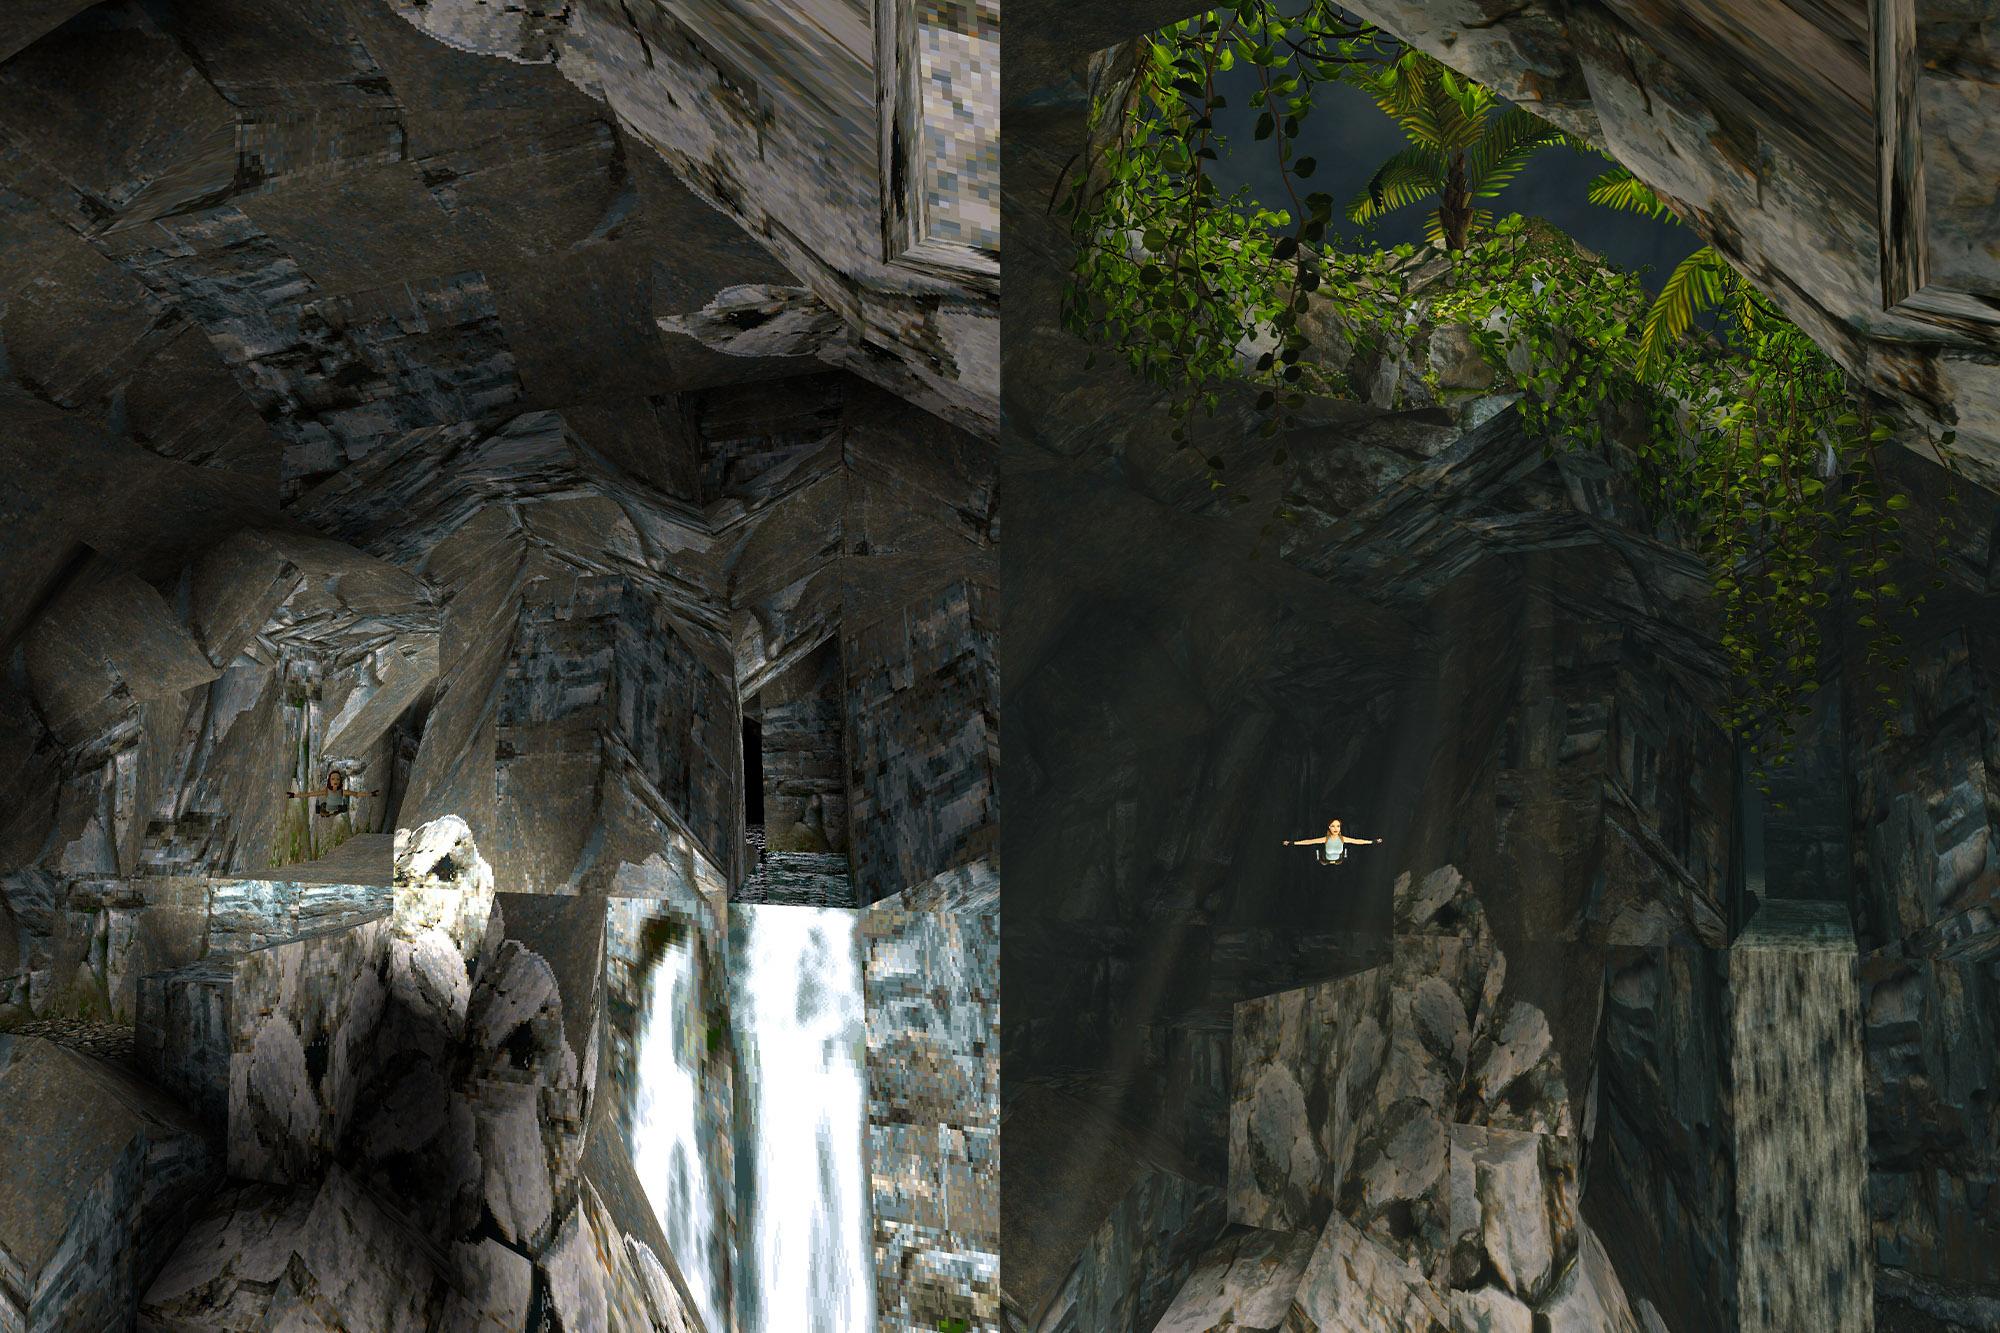 Difference between the original and modern graphics showcasing the new light source in the Lost Valley